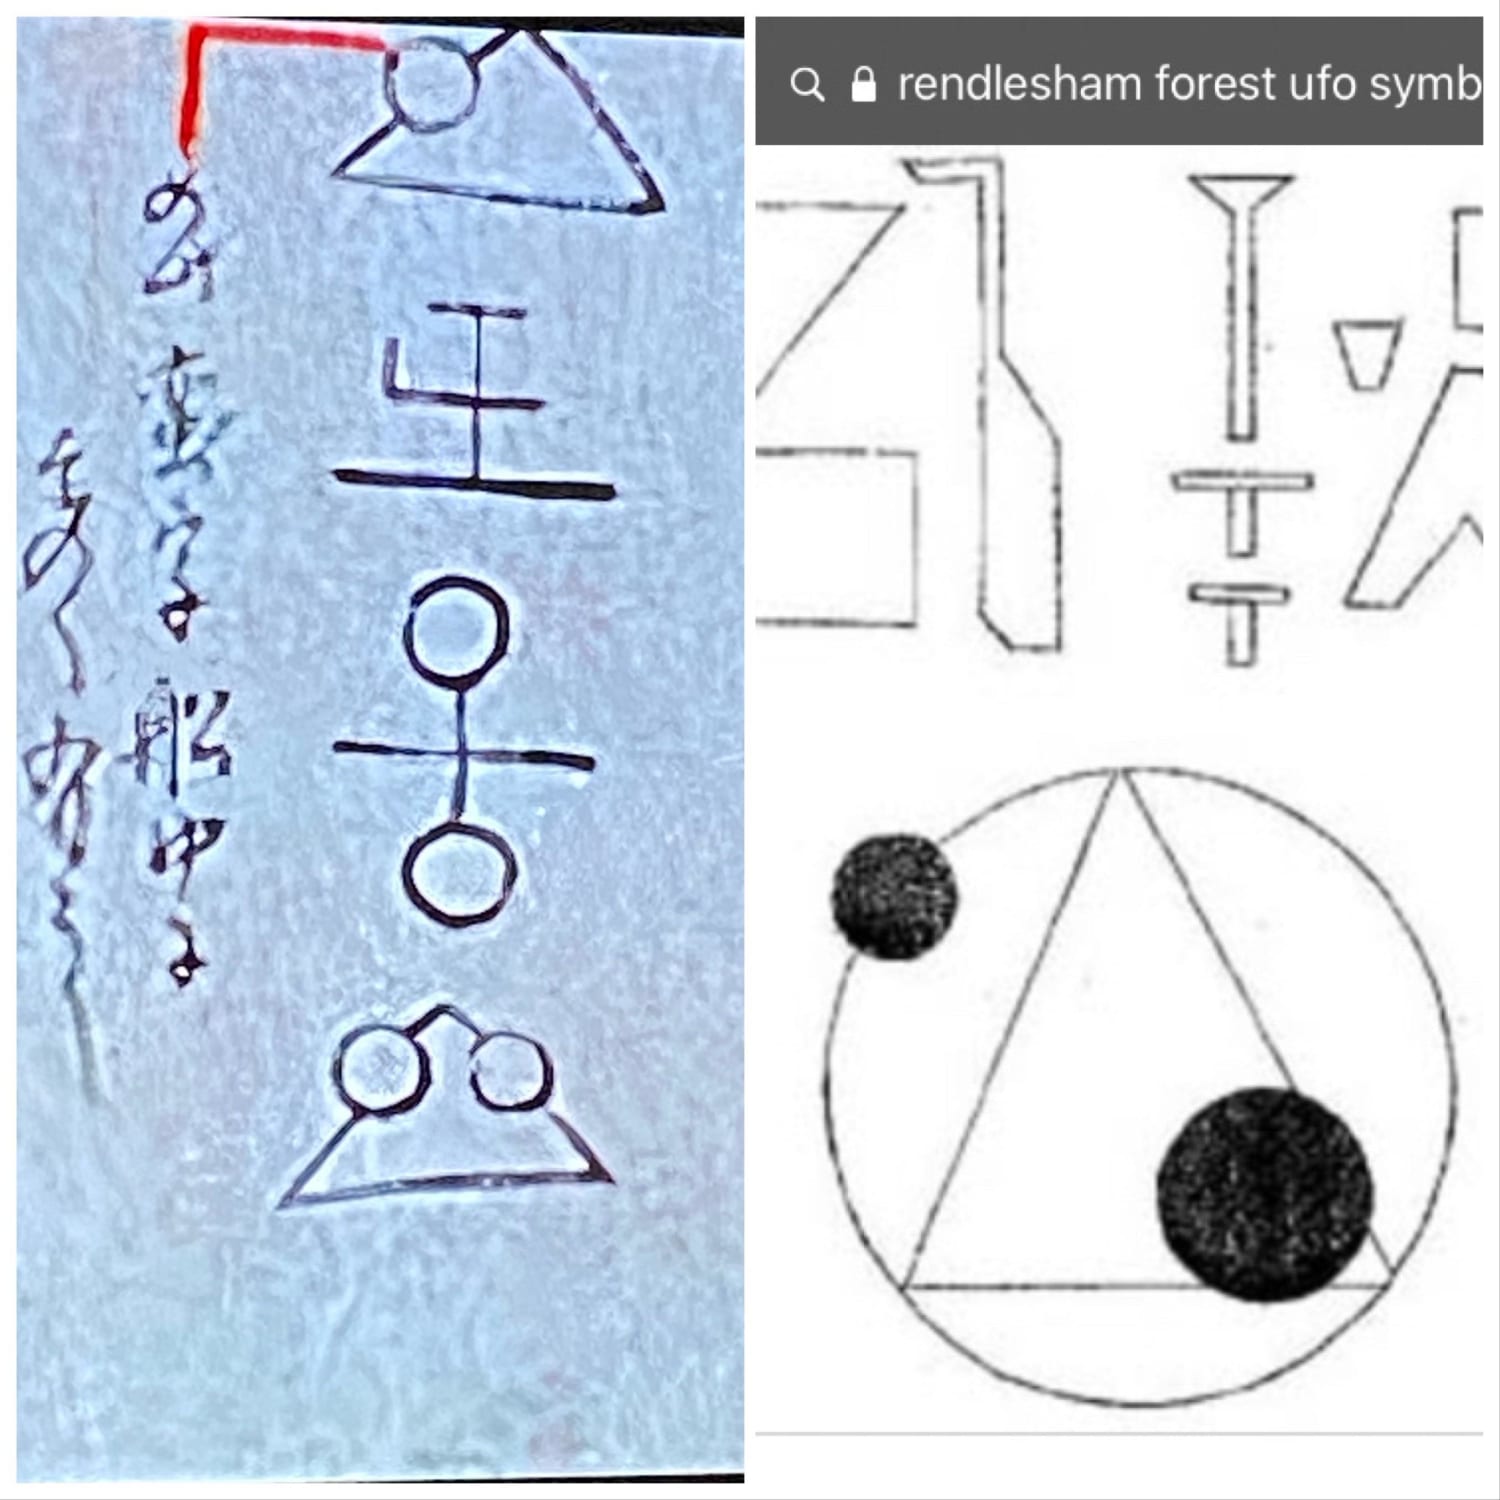 Was this added to fool people after the fact? The Rendlesham Forest symbols match the style of the Utsurobune Japanese 1803 symbols closely.